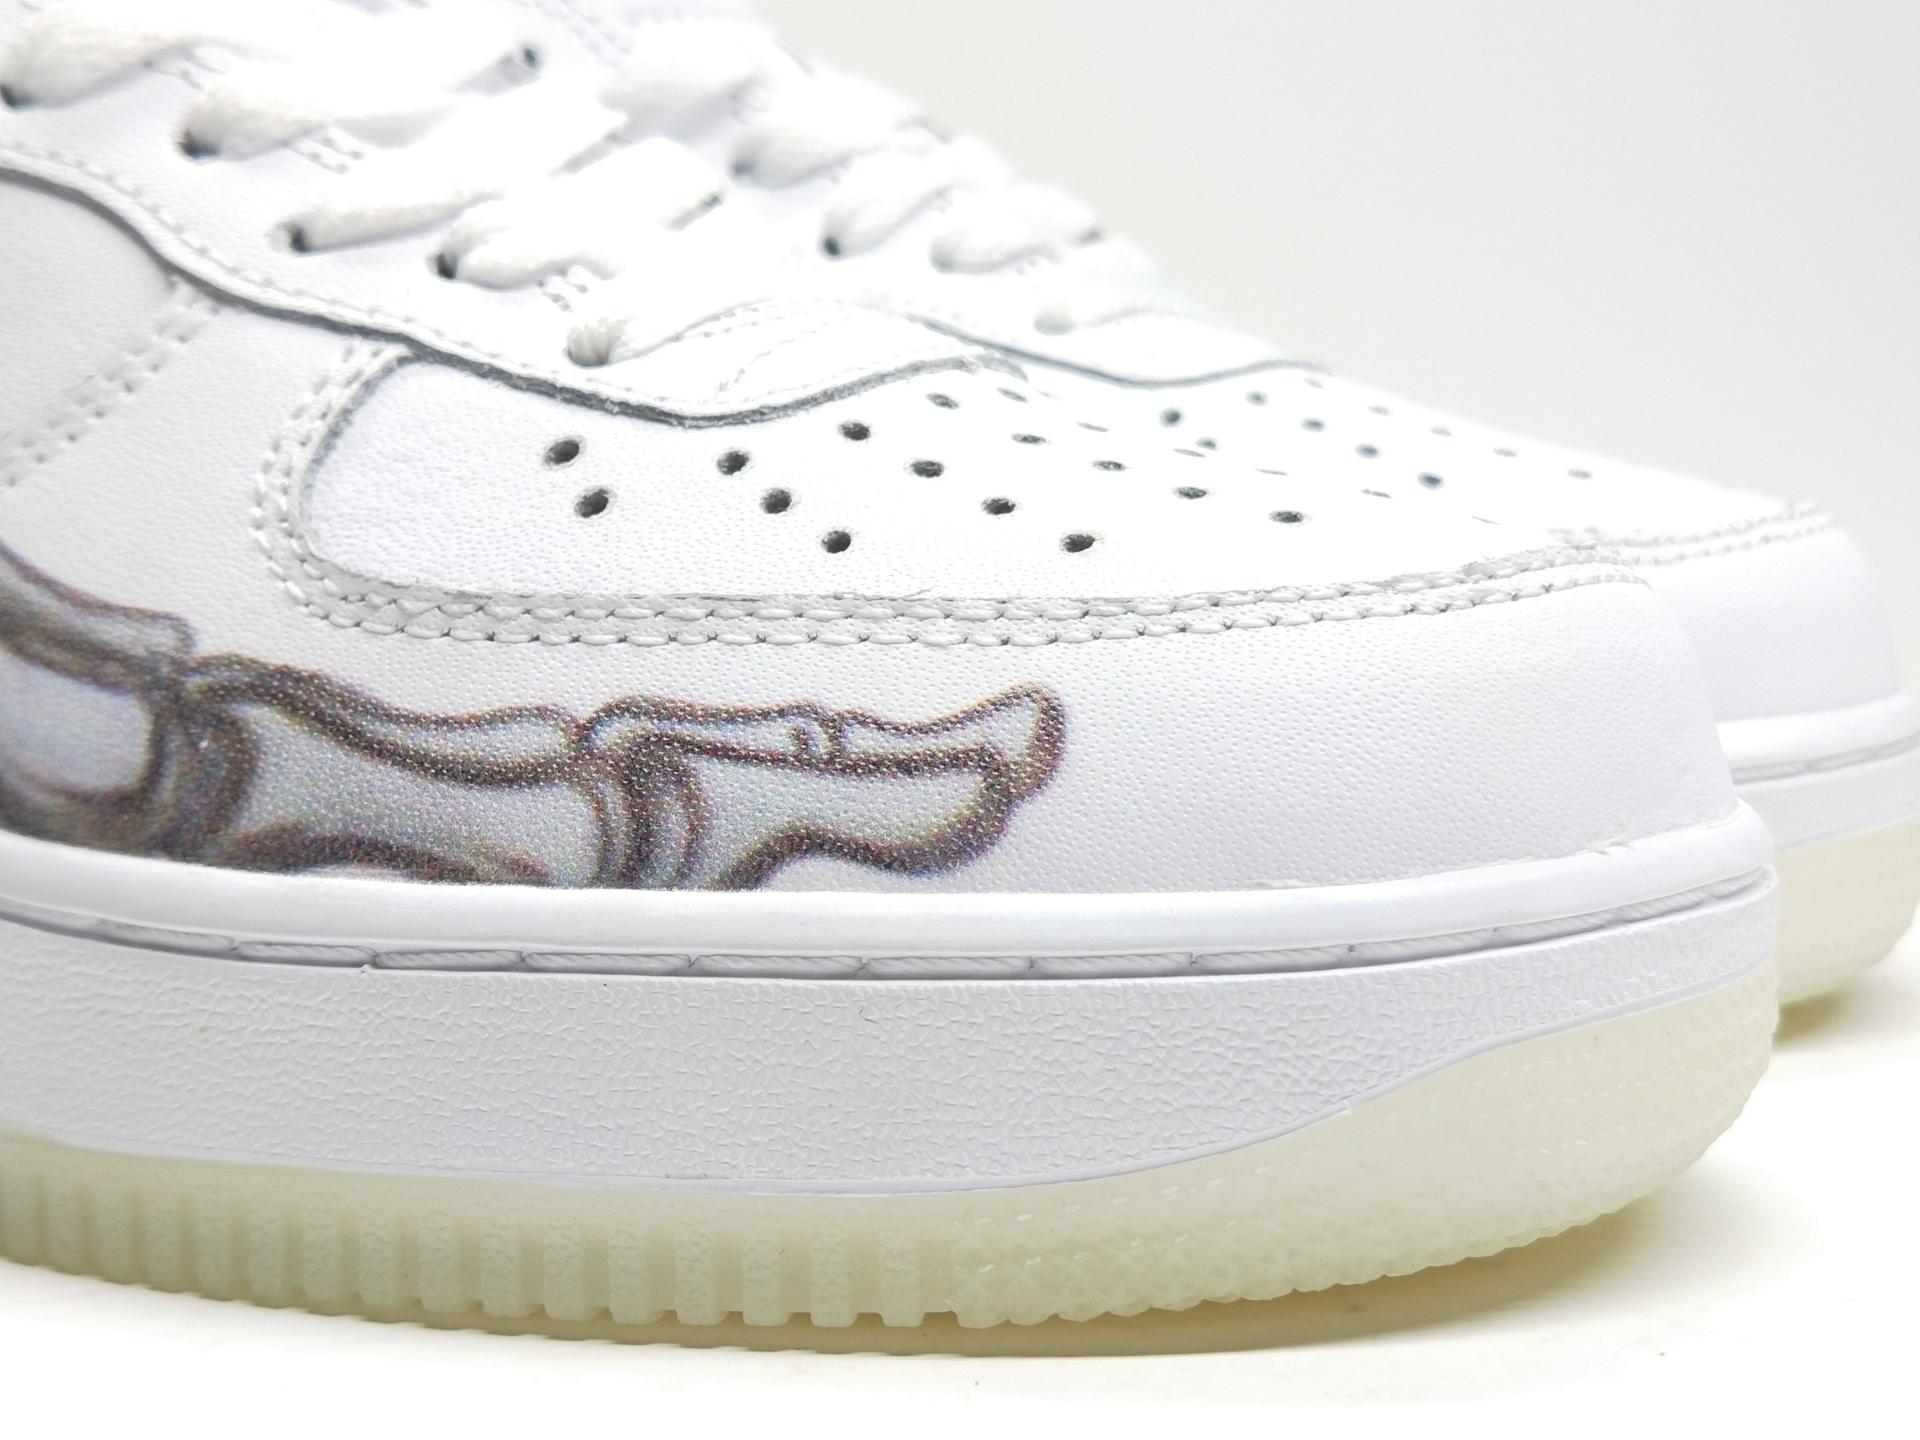 Air Force 1 Skeleton - whatever on 